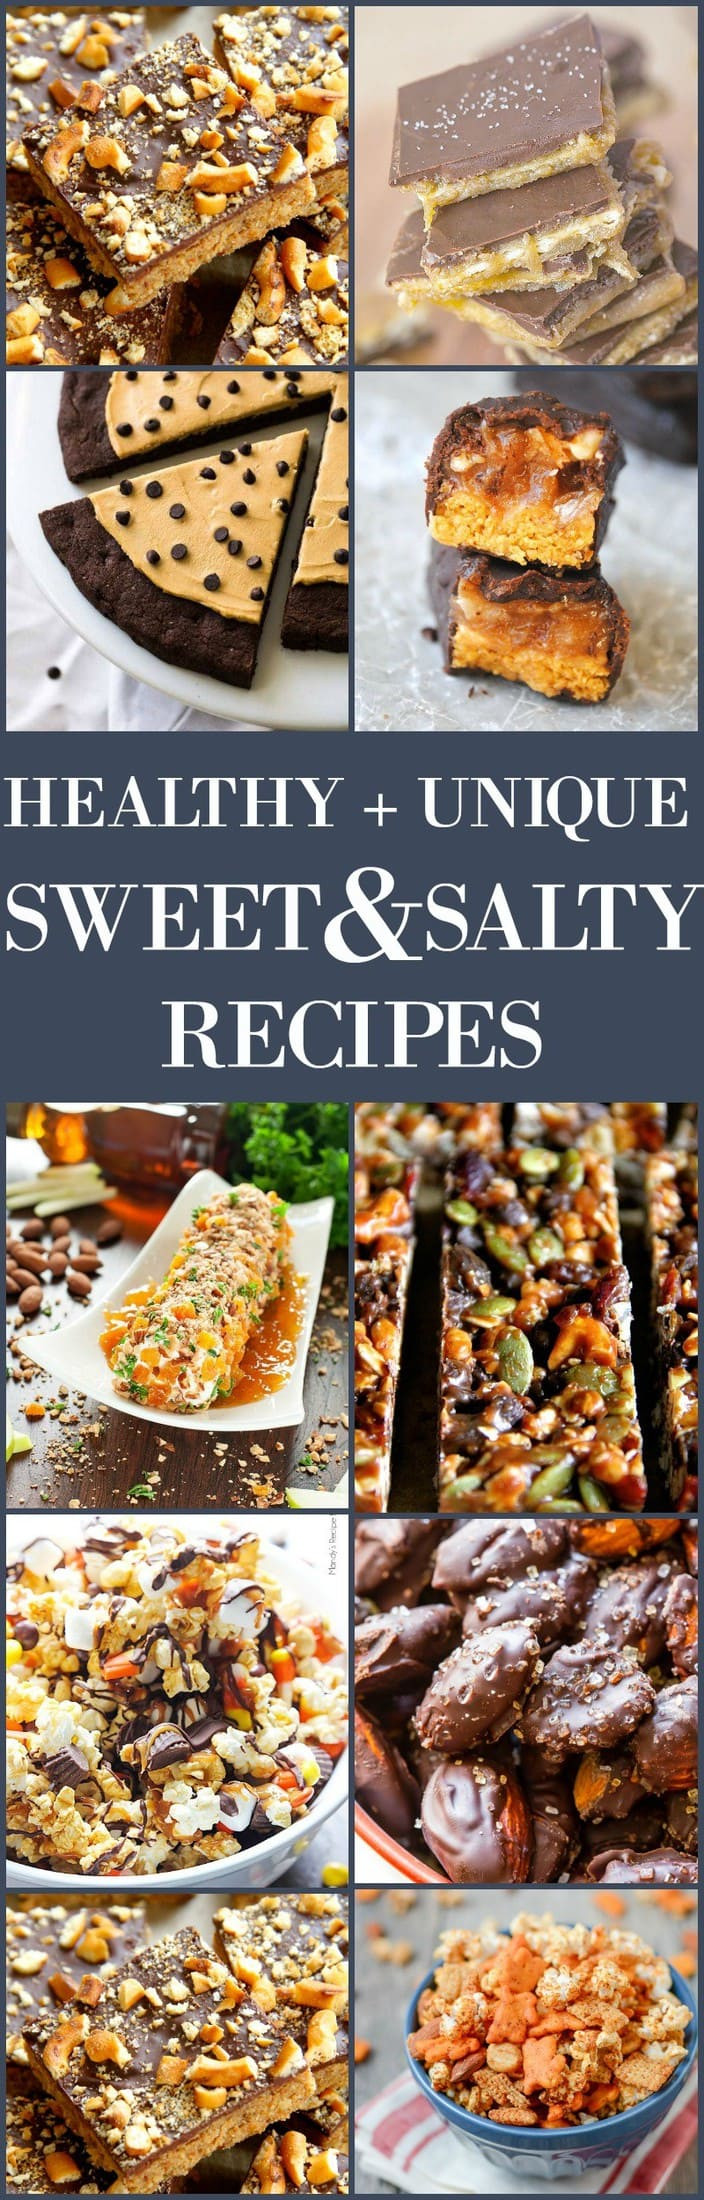 Sweet Snacks Recipes
 15 Healthy Sweet and Salty Snacks and Recipes